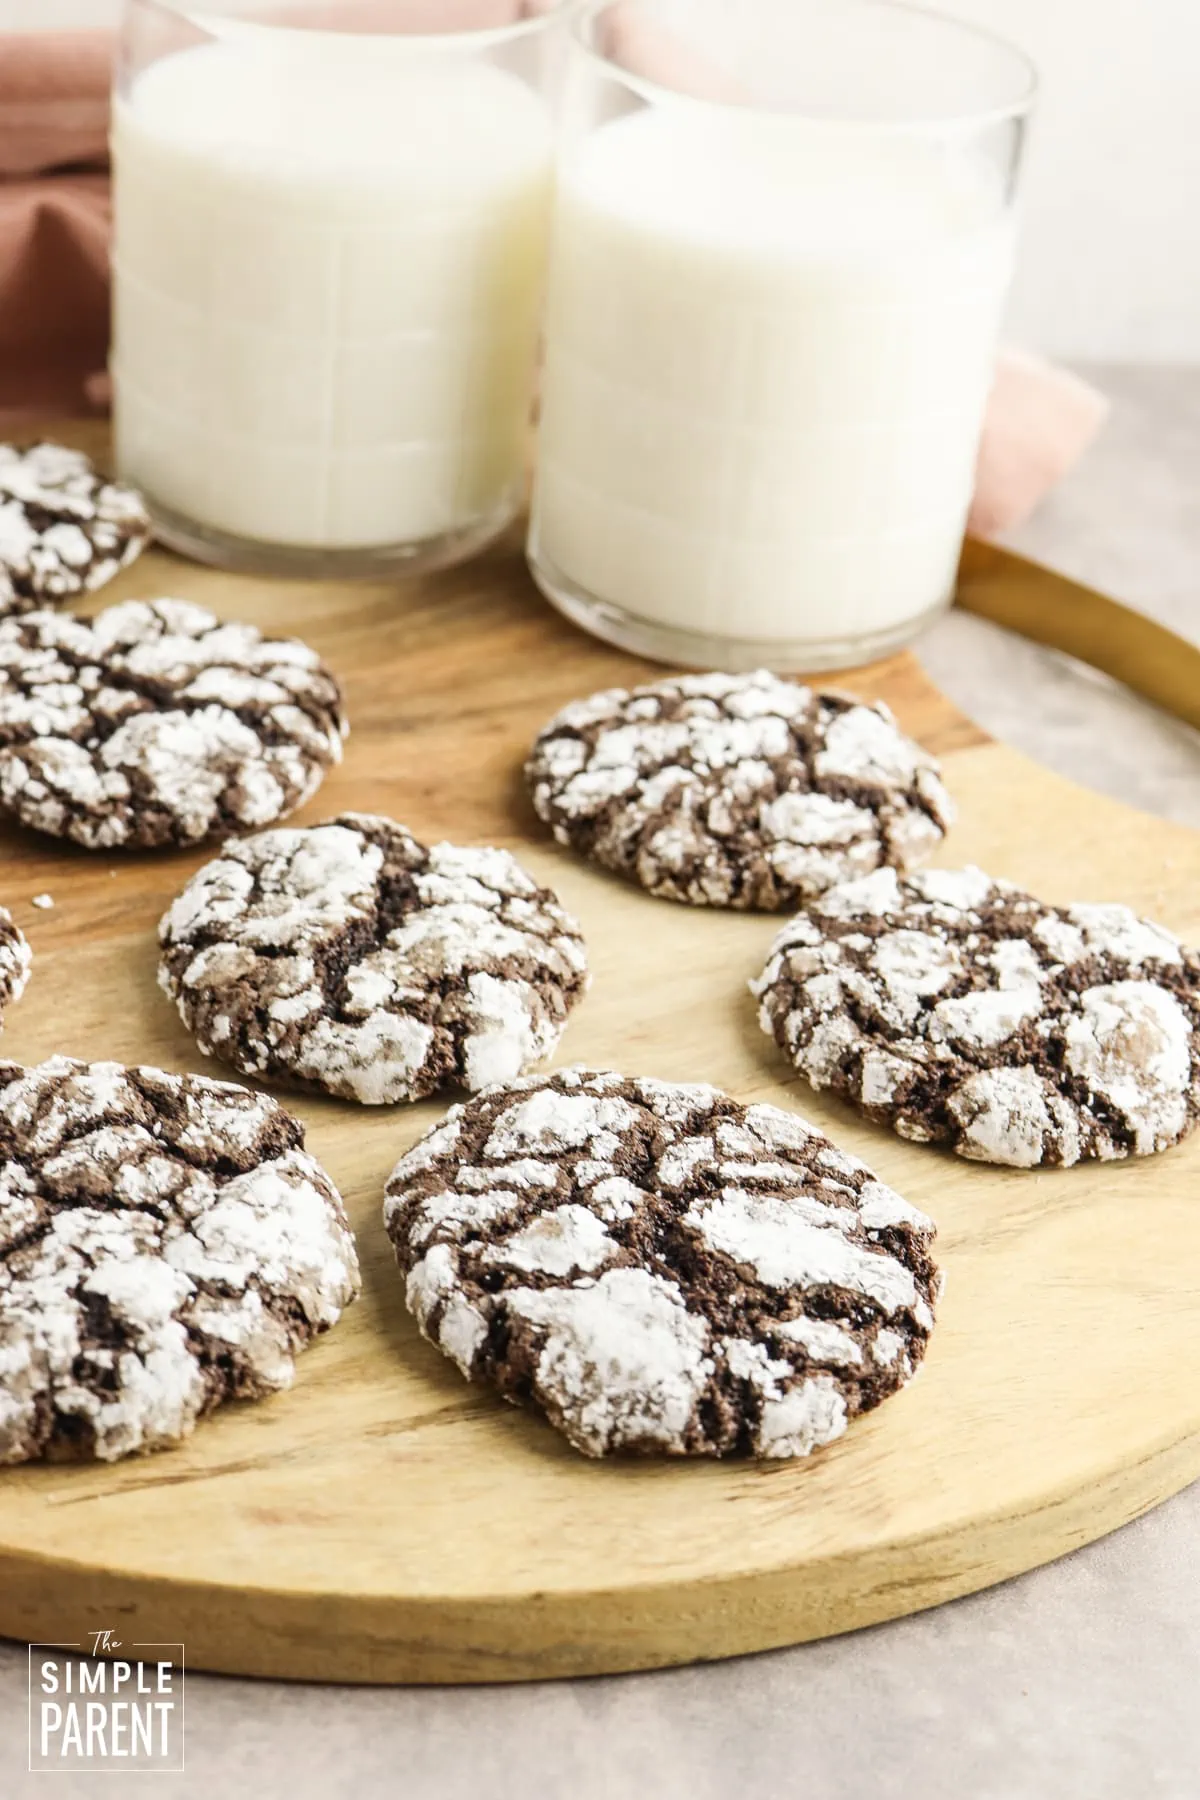 Chocolate cool whip cookies on wooden plate